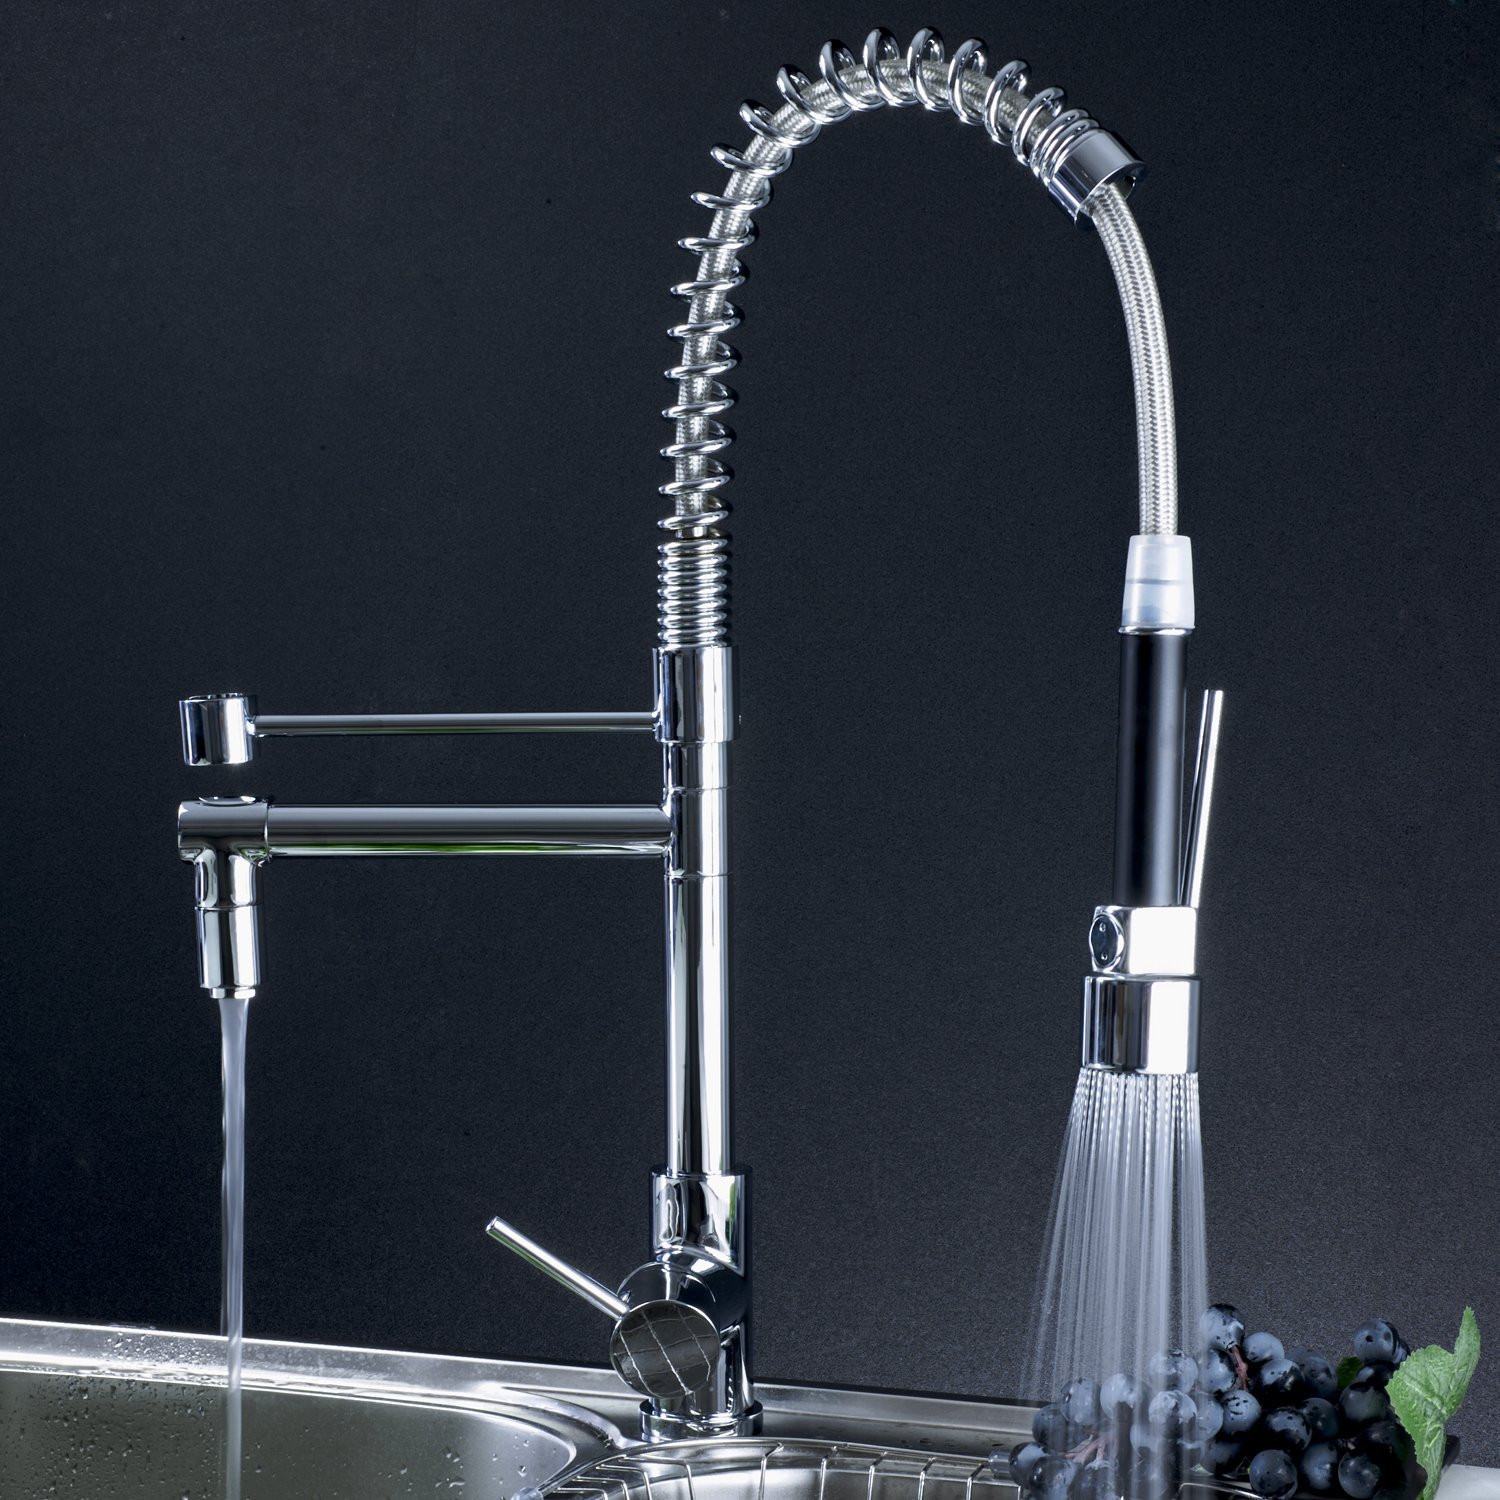 Modern Kitchen Faucets
 Professional Kitchen Faucet With Pull Out Spray 0323F